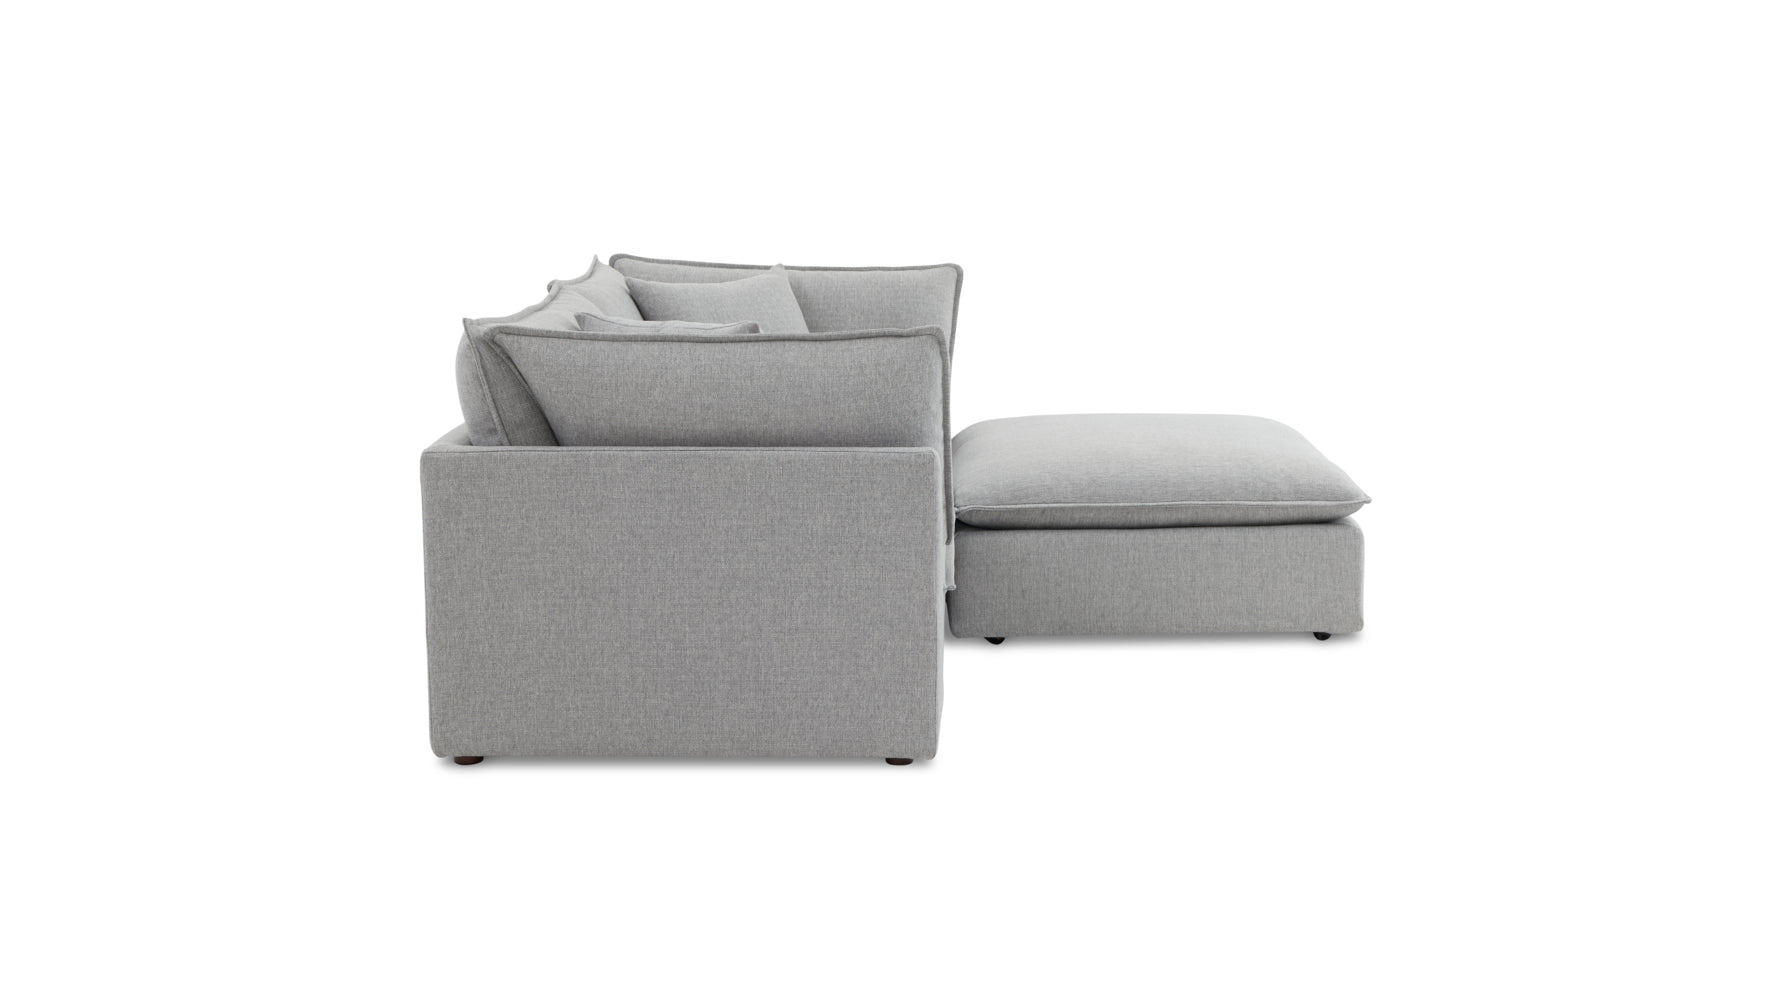 Chill Time 3-Piece Modular Sectional, Heather - Image 3